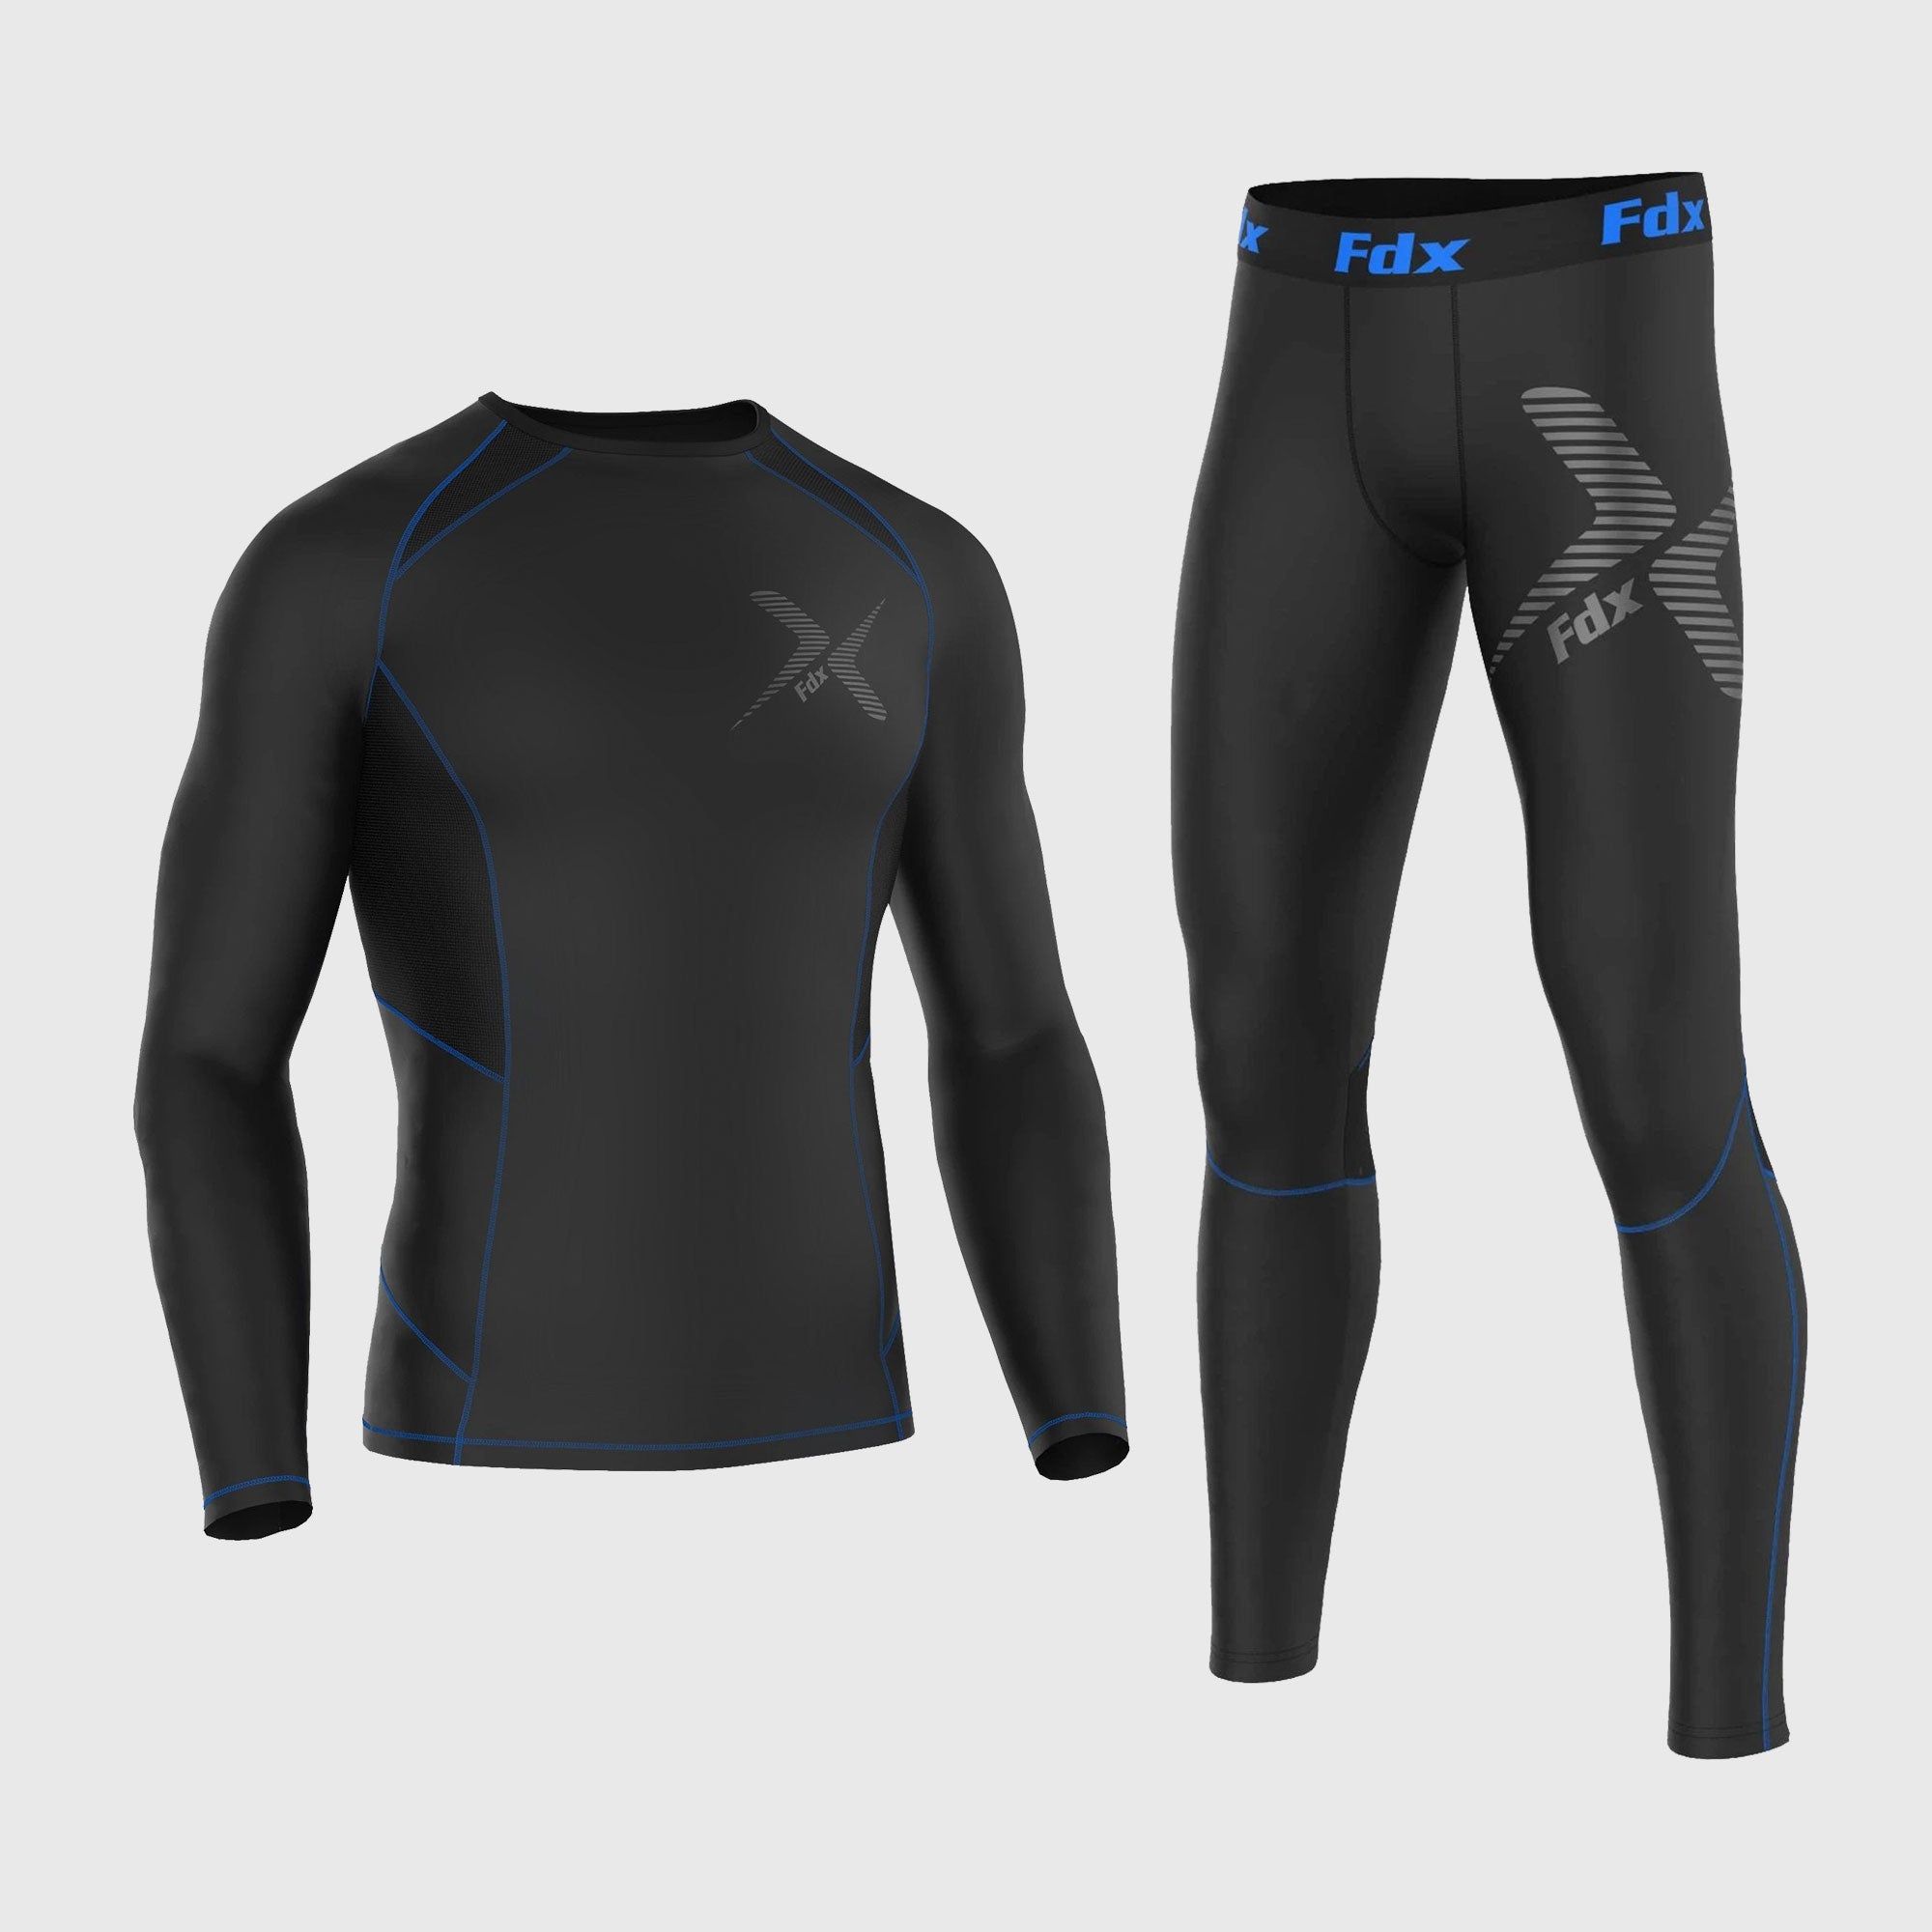 Tops, Compression Tights, Under Armour Base Layers, Imm-cnrShops